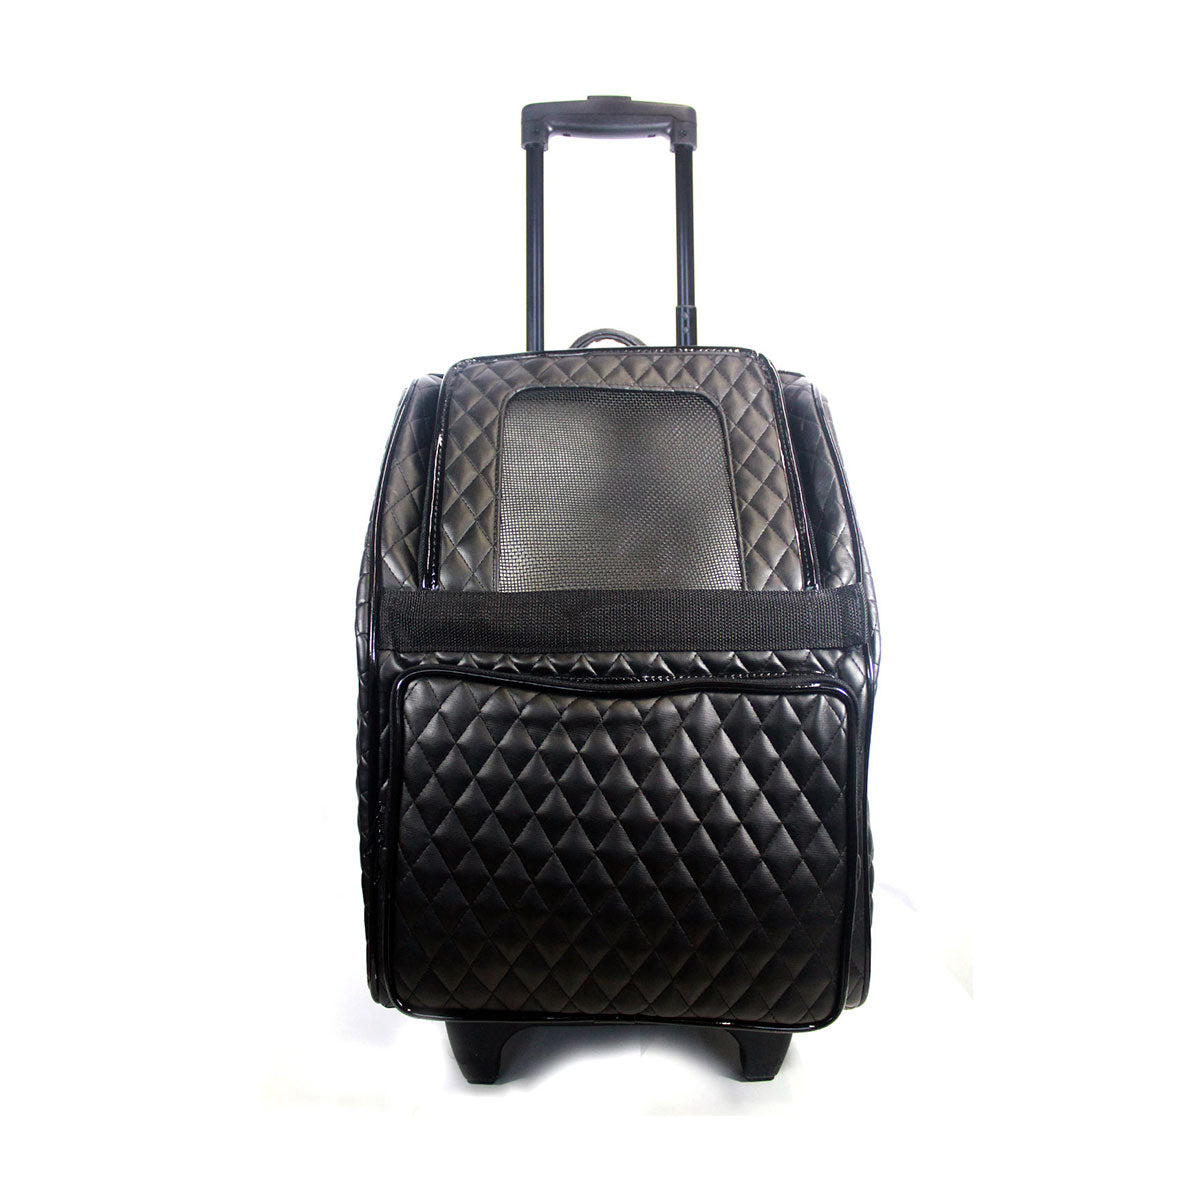 Rio Carrier Bag on Wheels - Quilted Black Luxe | Pawlicious & Company